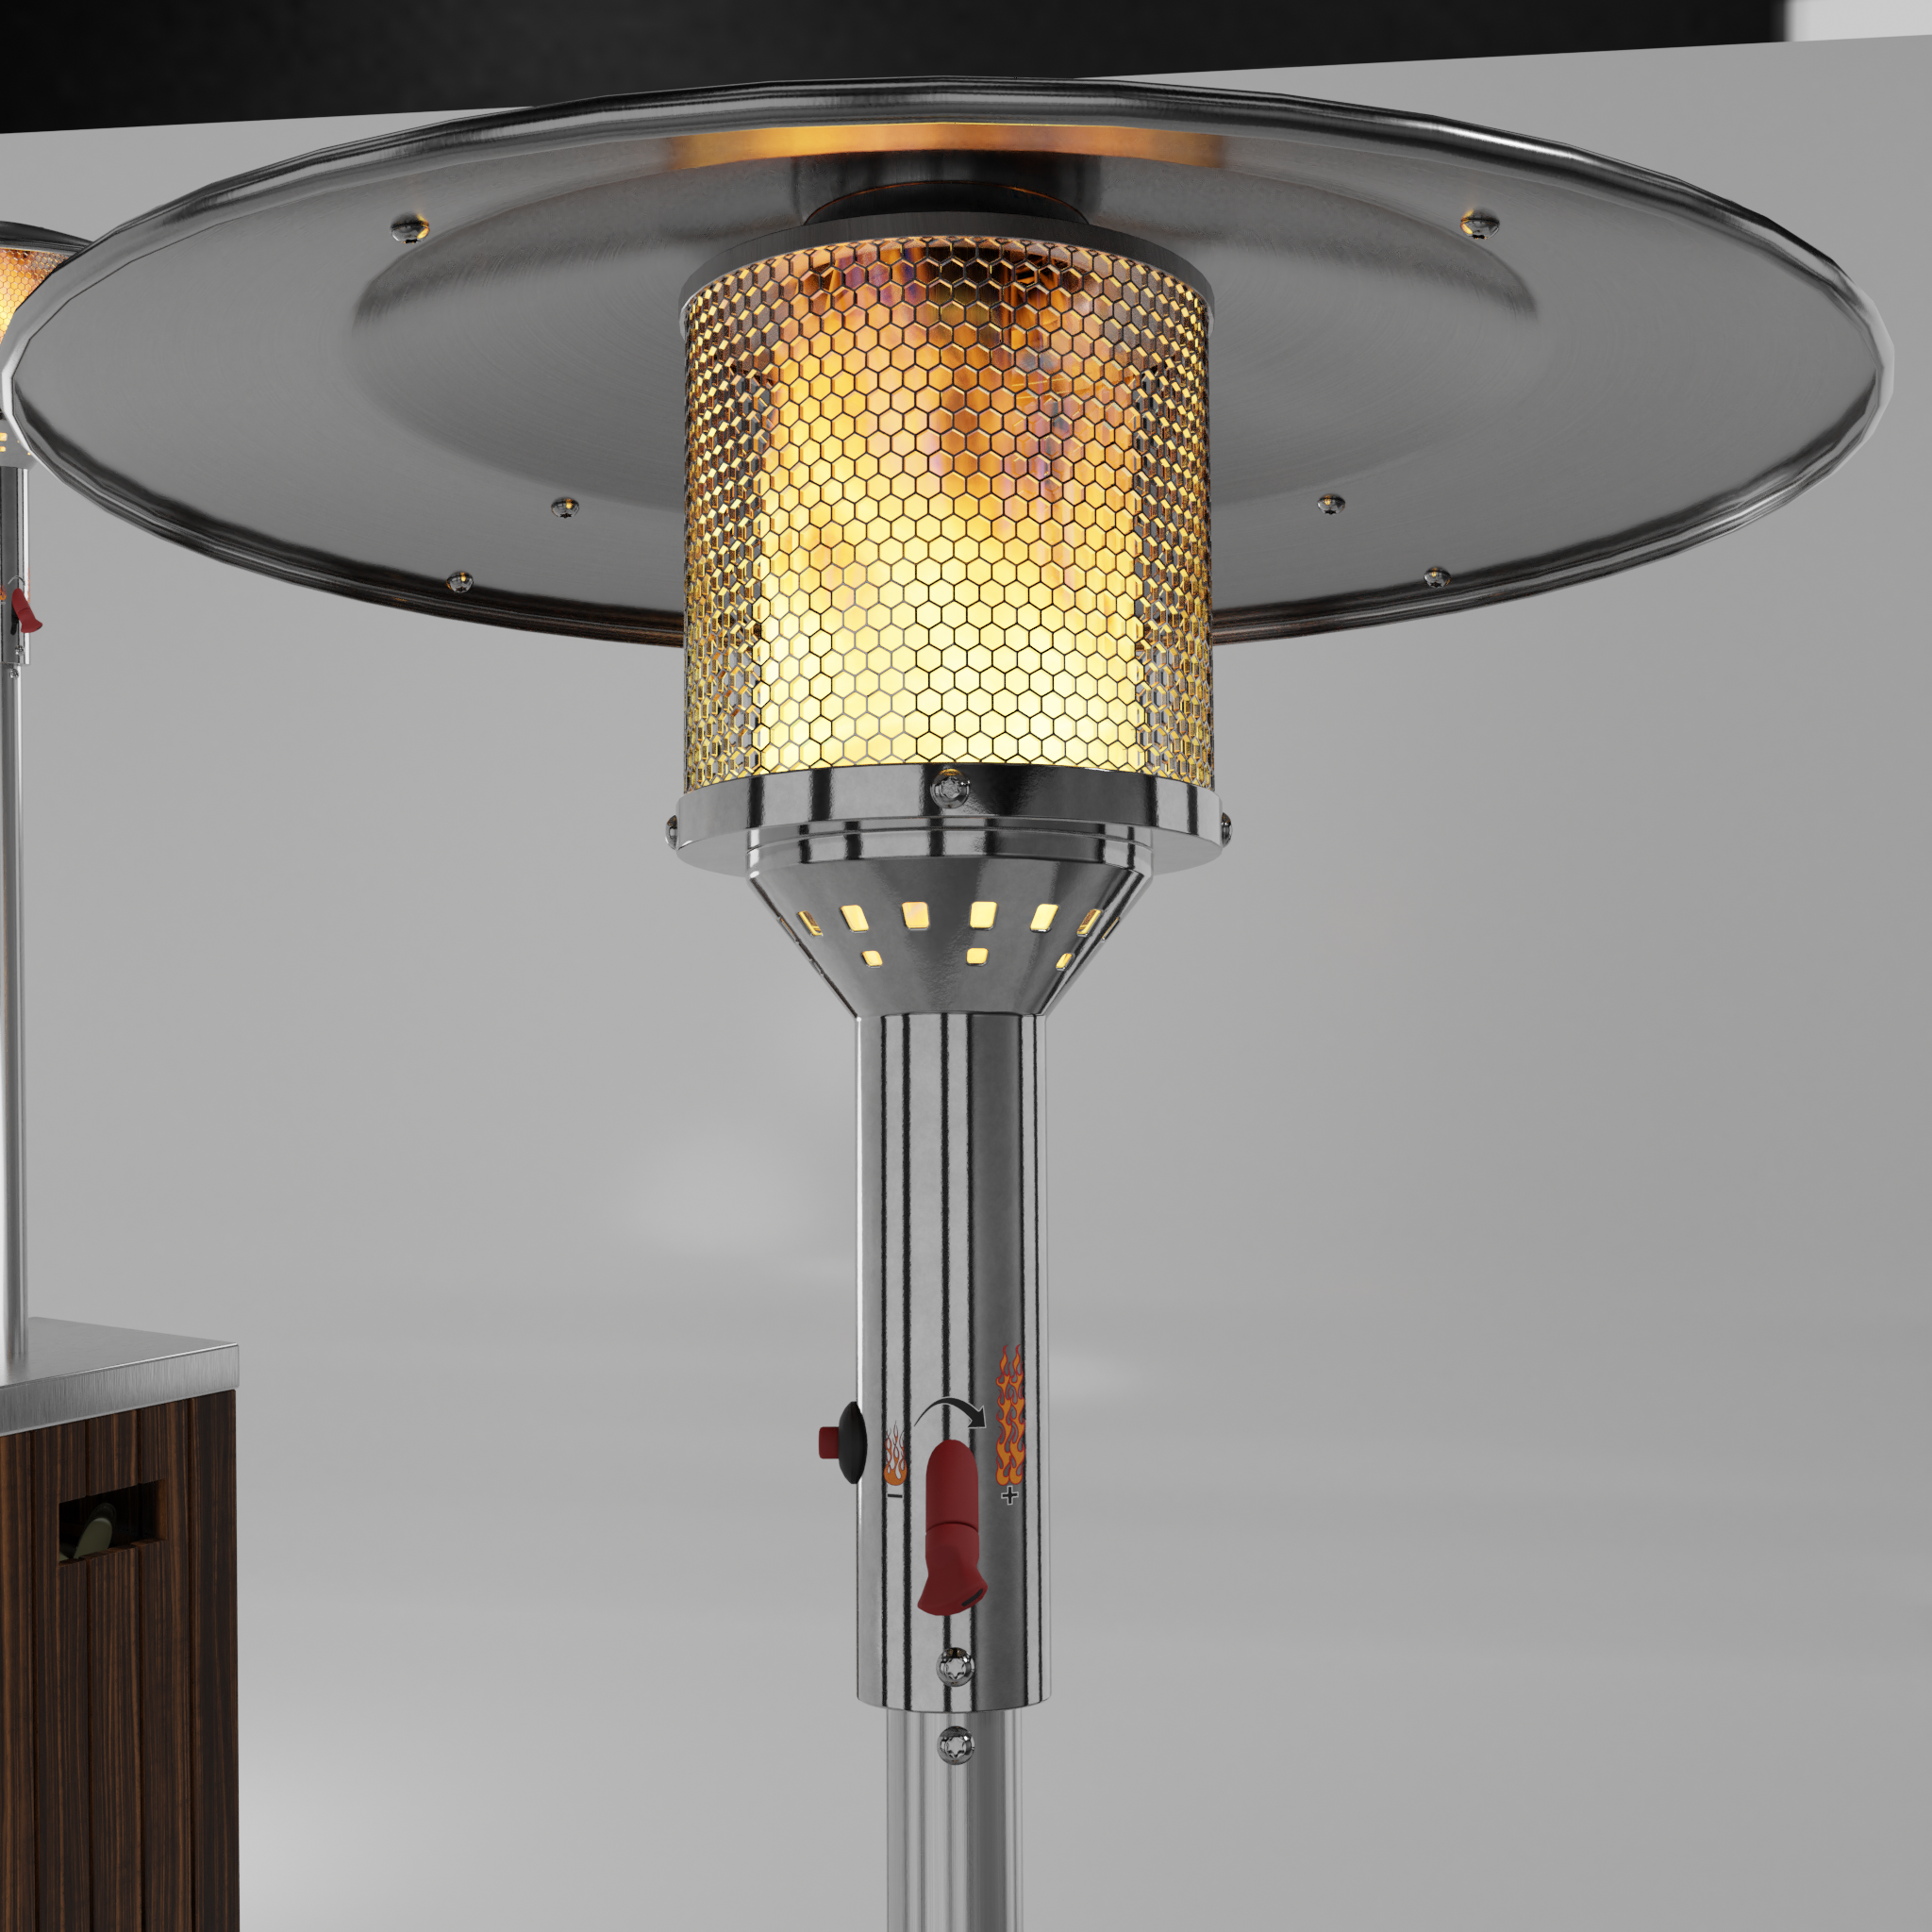 Gas Heater-Patio Heater preview image 2